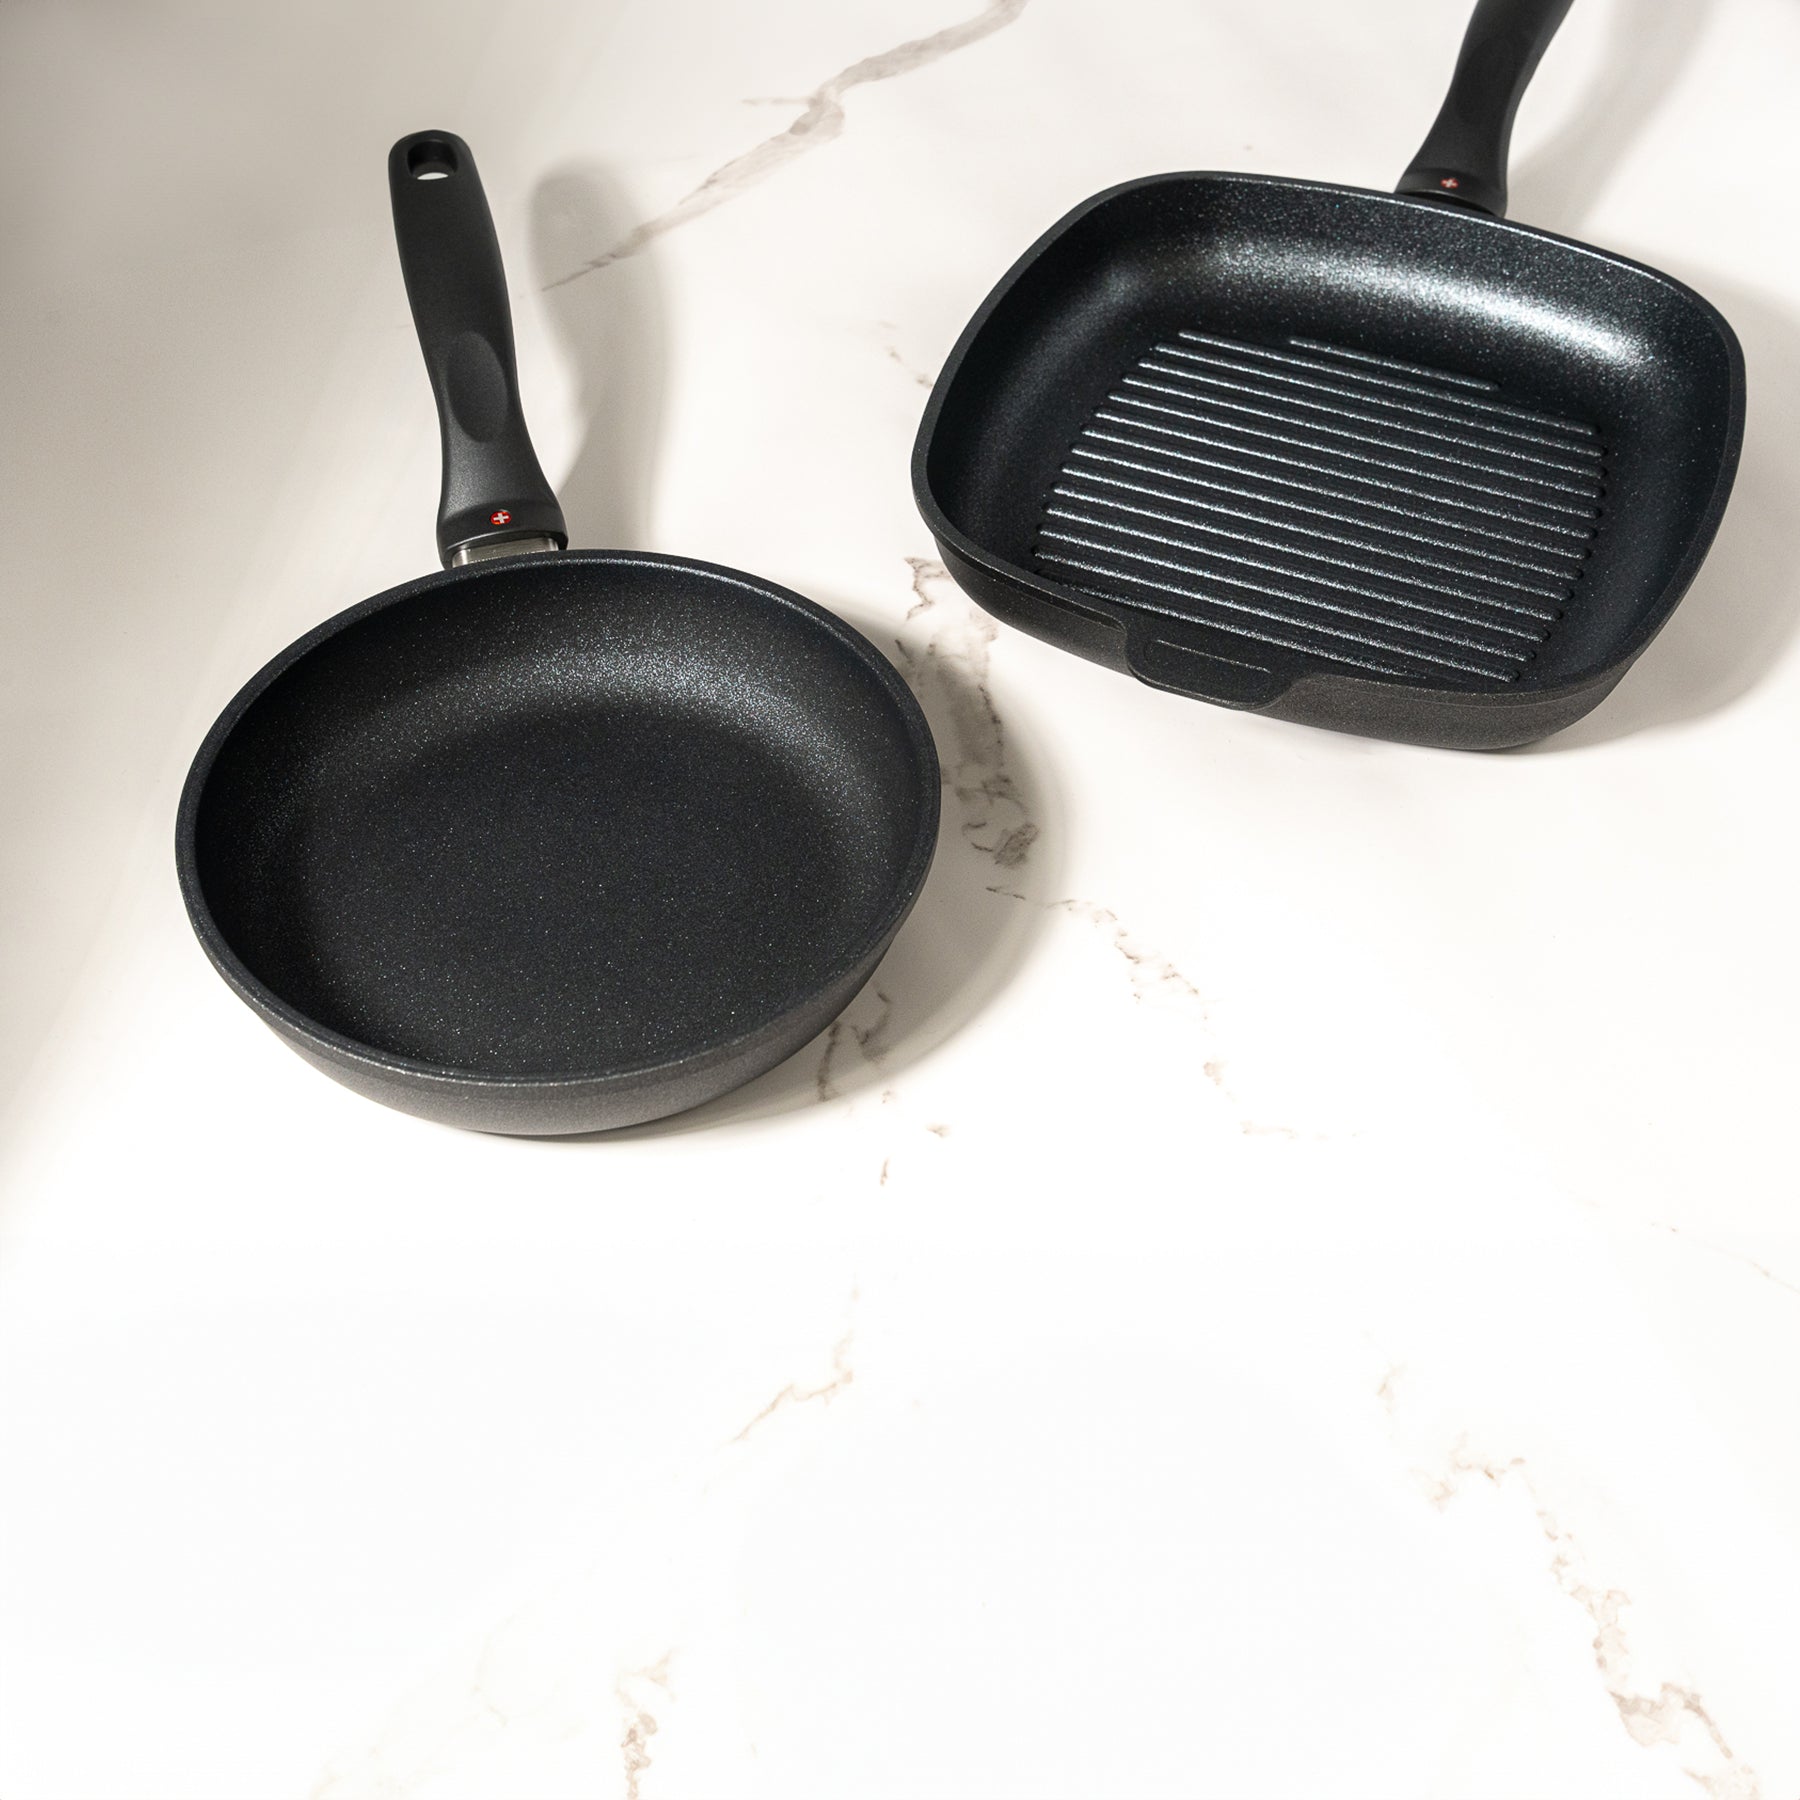 XD Nonstick 8" Fry Pan and 9.5"x 9.5" Grill Pan Set on kitchen counter